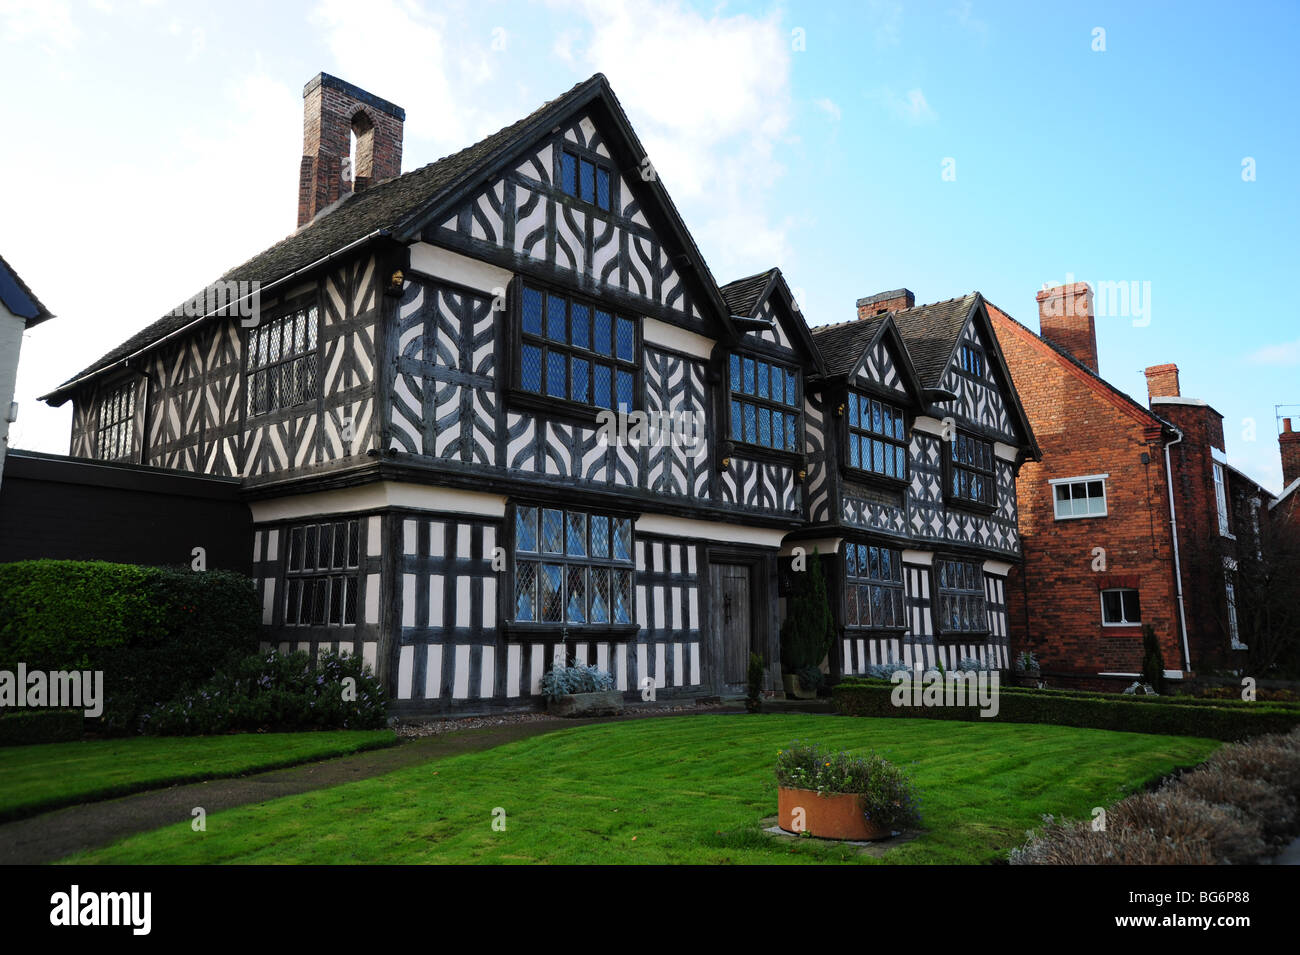 Chiese mansion Nantwich nel Cheshire Foto Stock